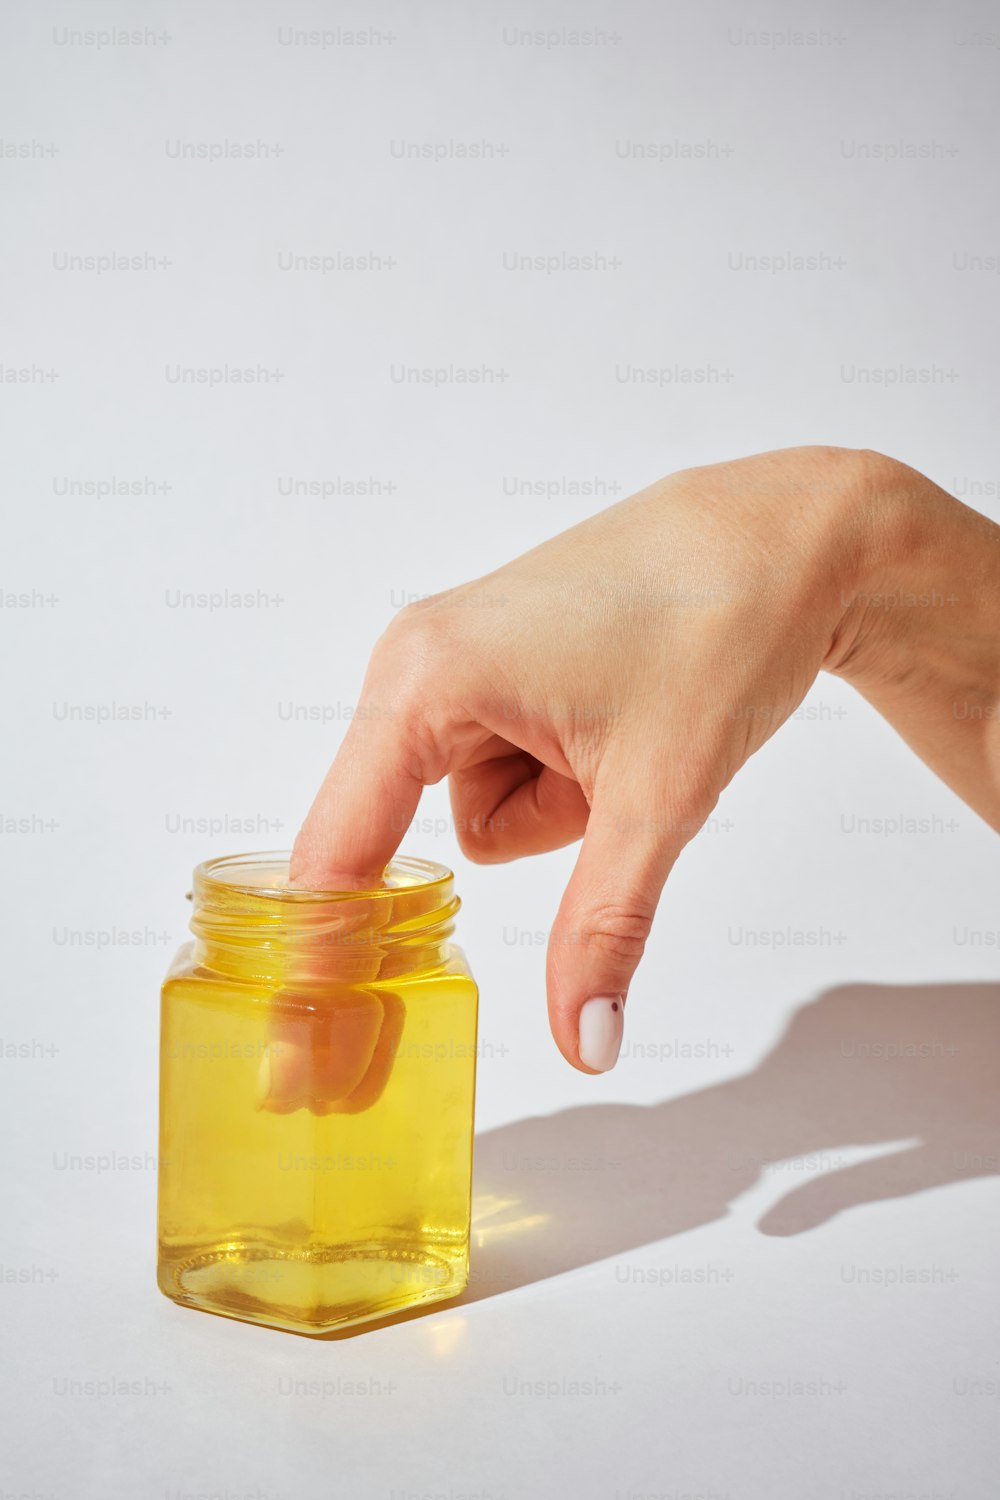 a person's hand reaching for a jar of honey